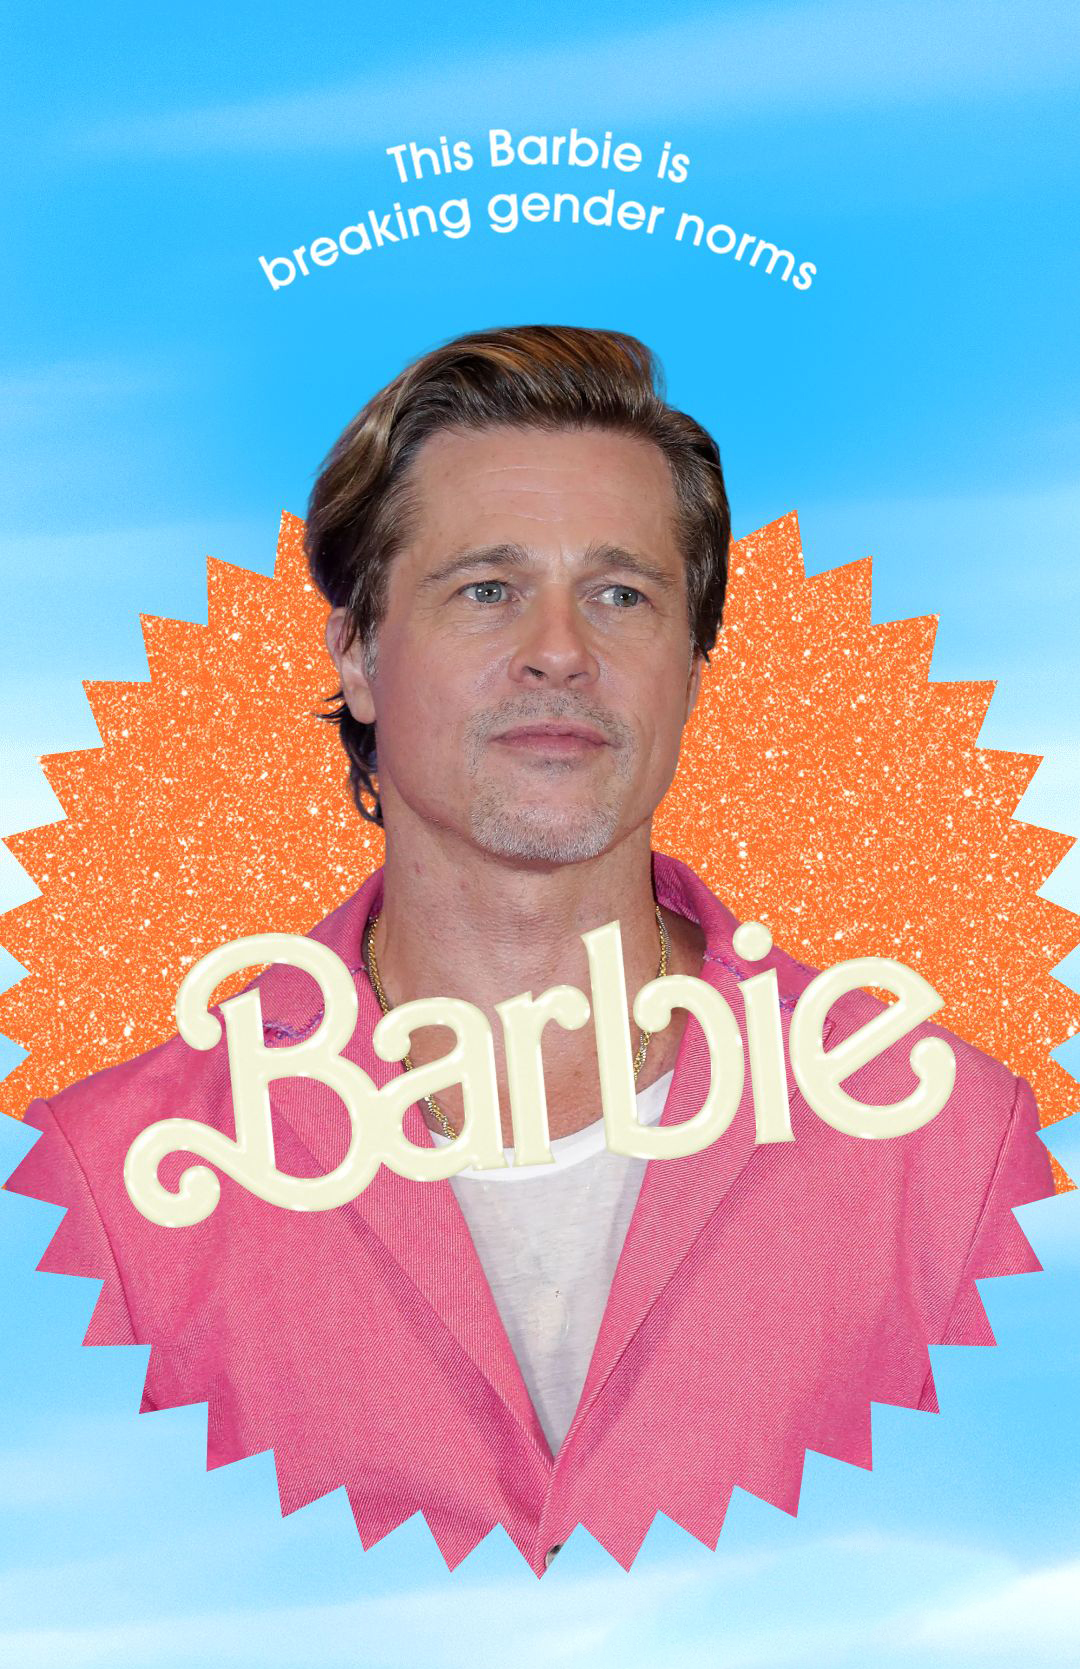 Created with the Barbie Selfie Generator, this artwork shows Brad Pitt in a Kencore mood